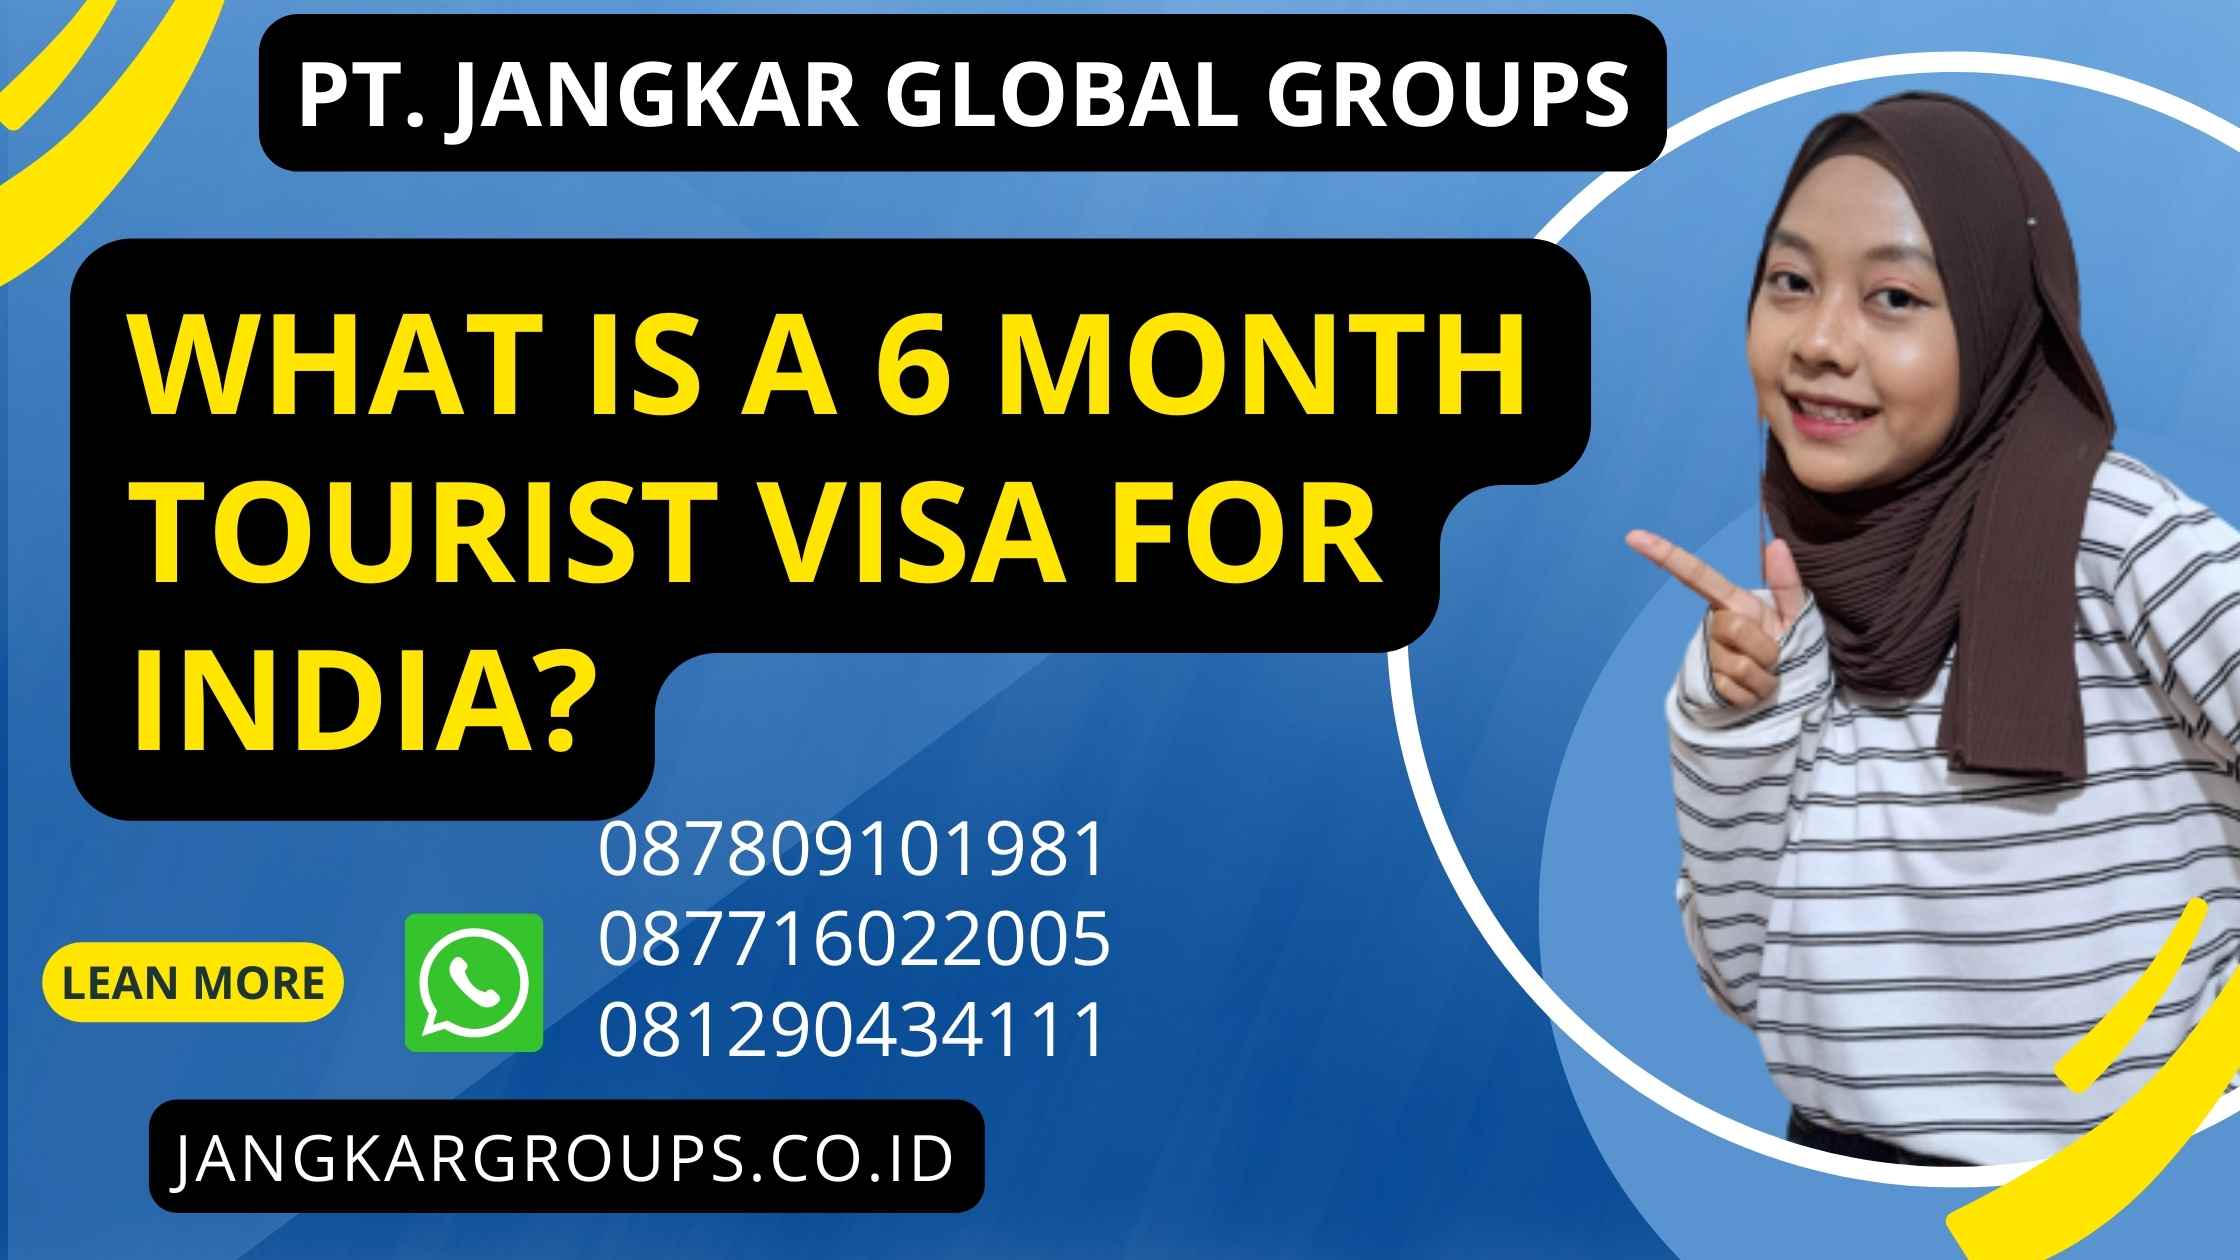 What is a 6 Month Tourist Visa for India?